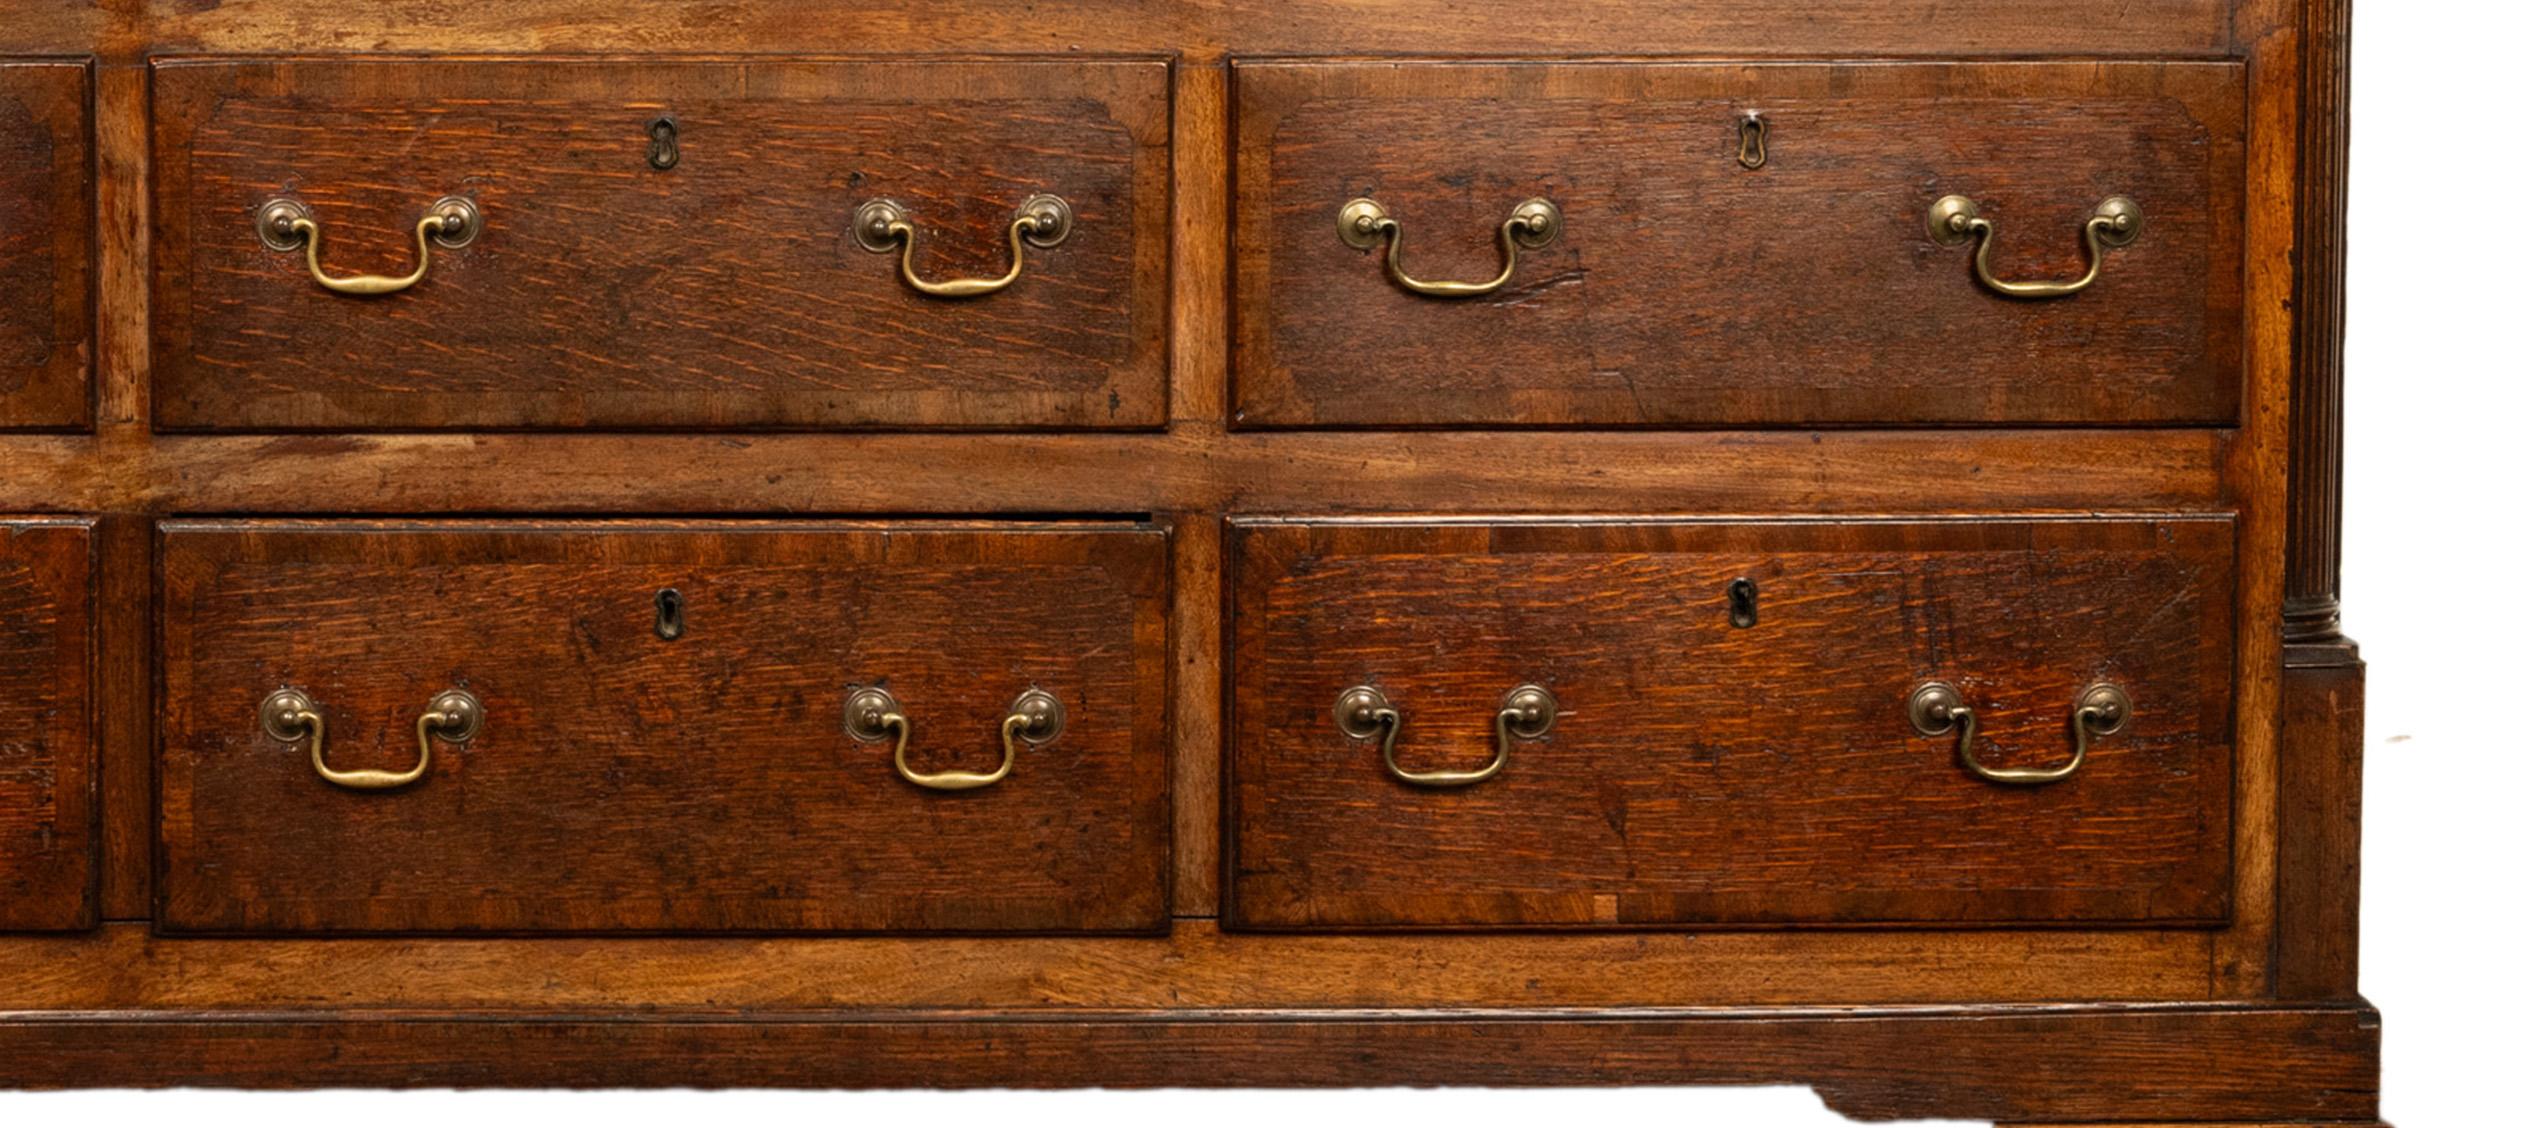 Antique 18th C Georgian Oak Mahogany Hinged Top Mule Chest Coffer Sideboard 1770 For Sale 8